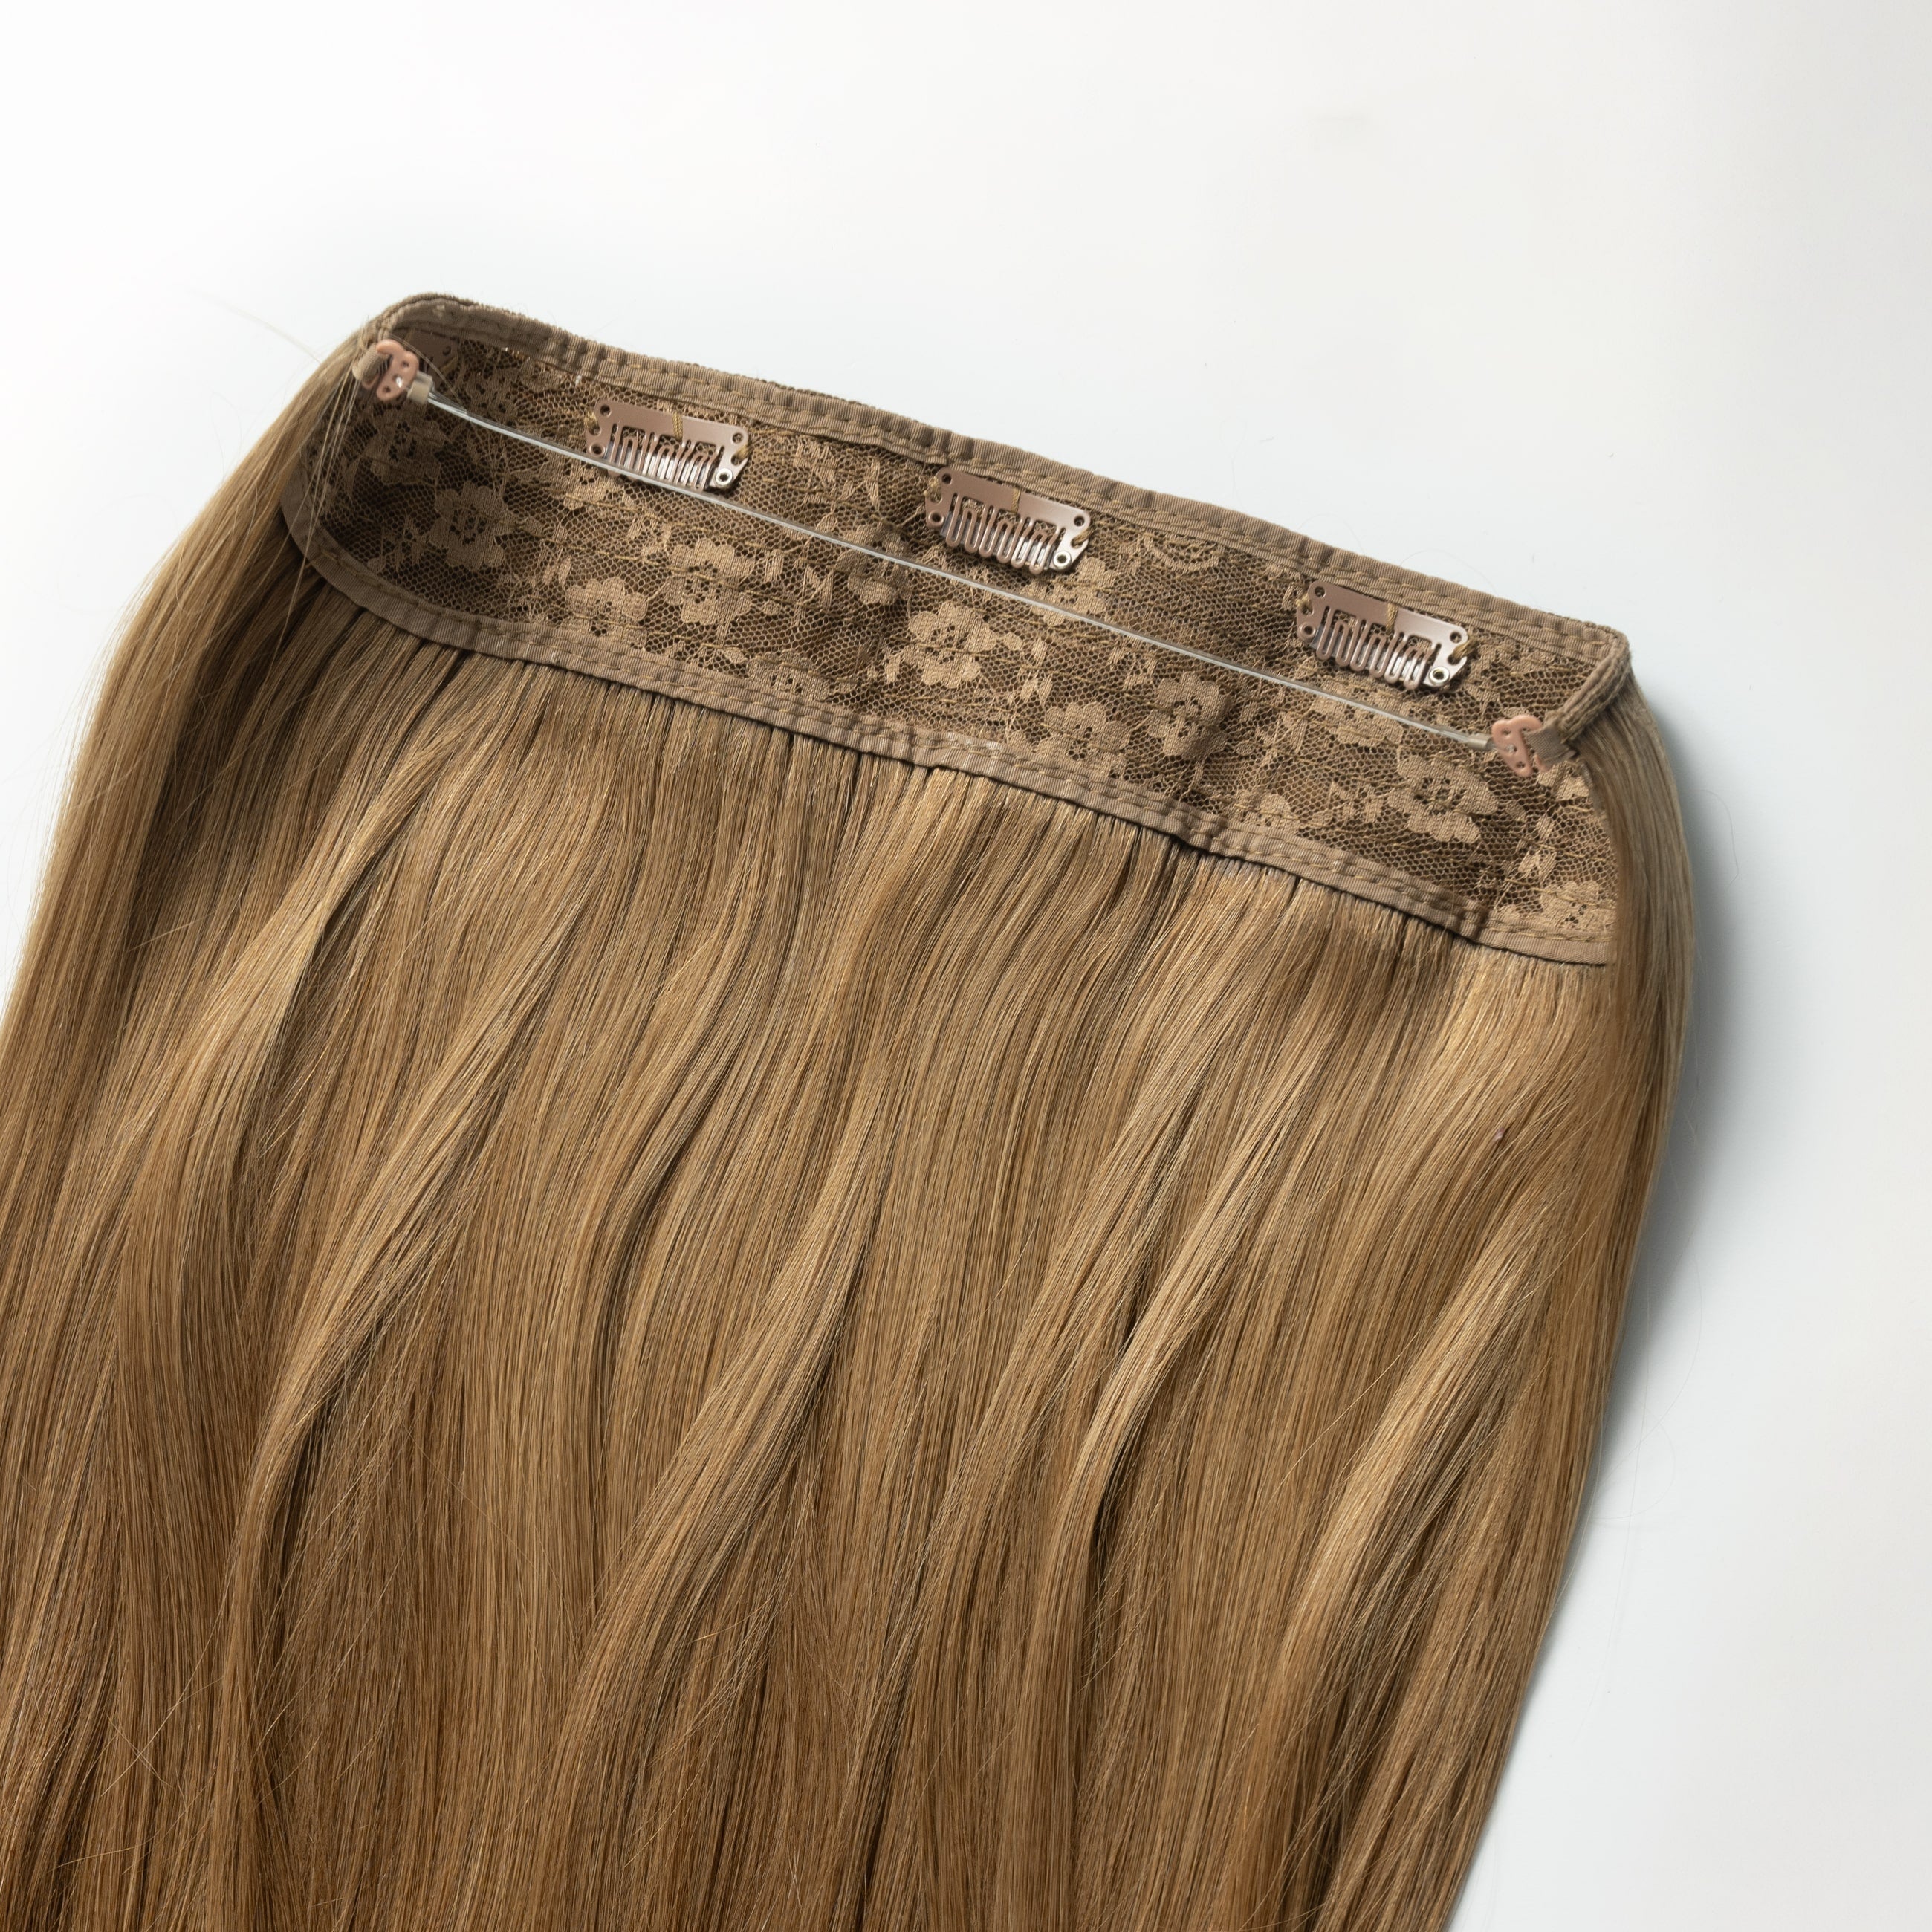 Halo extensions - Light Natural Brown 5